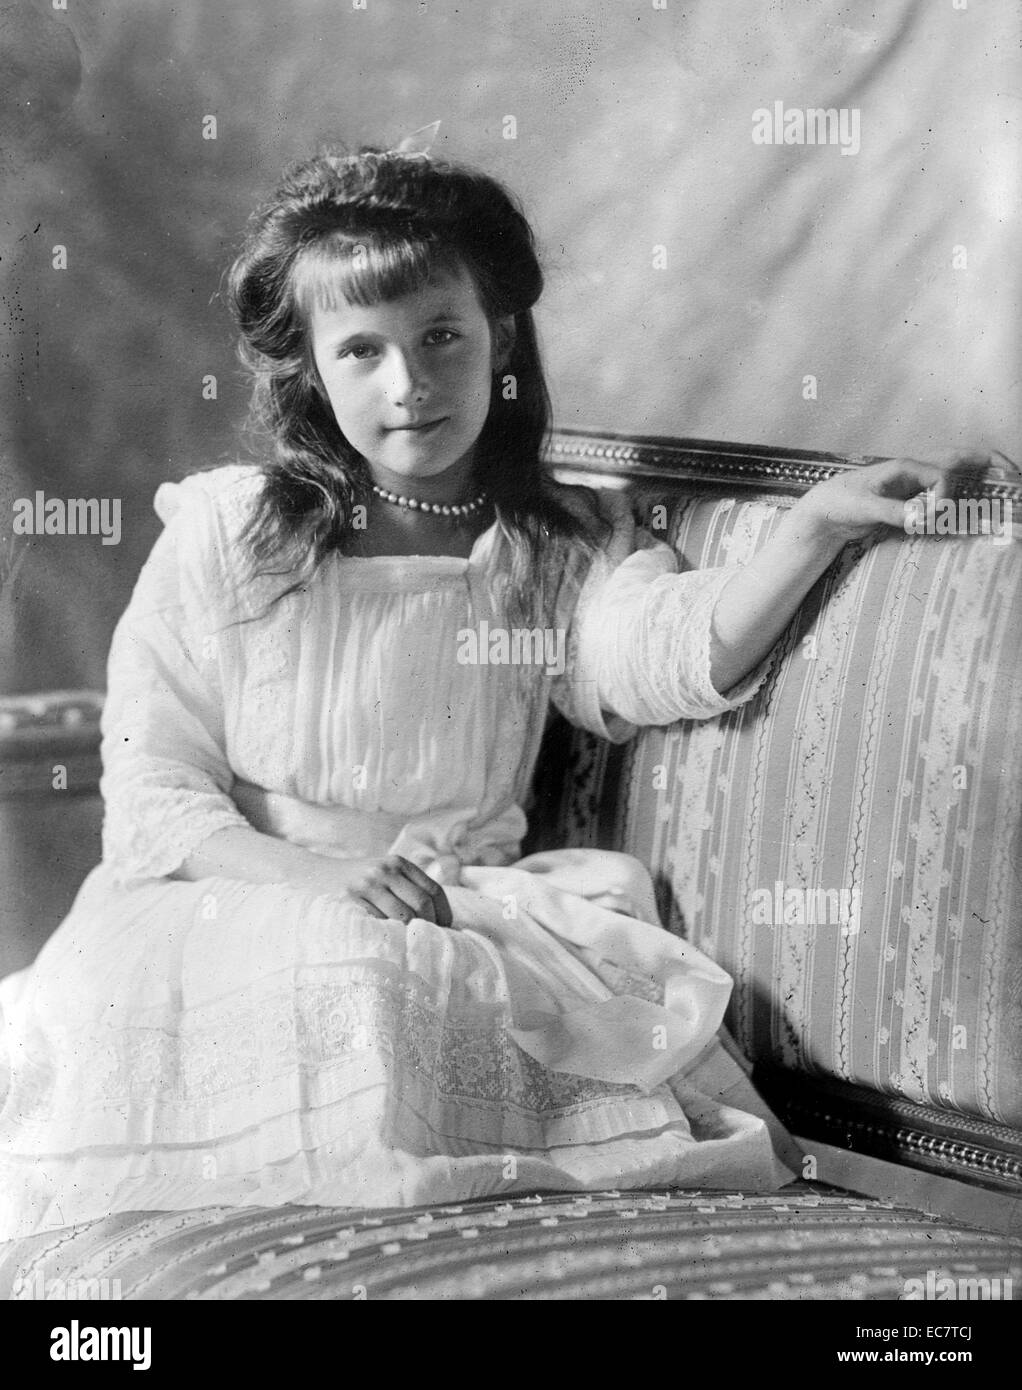 Grand Duchess Anastasia of Russia, 1901 - July 17, 1918. She was the youngest daughter of Tsar Nicholas II, The last Tsar of Russia. Stock Photo